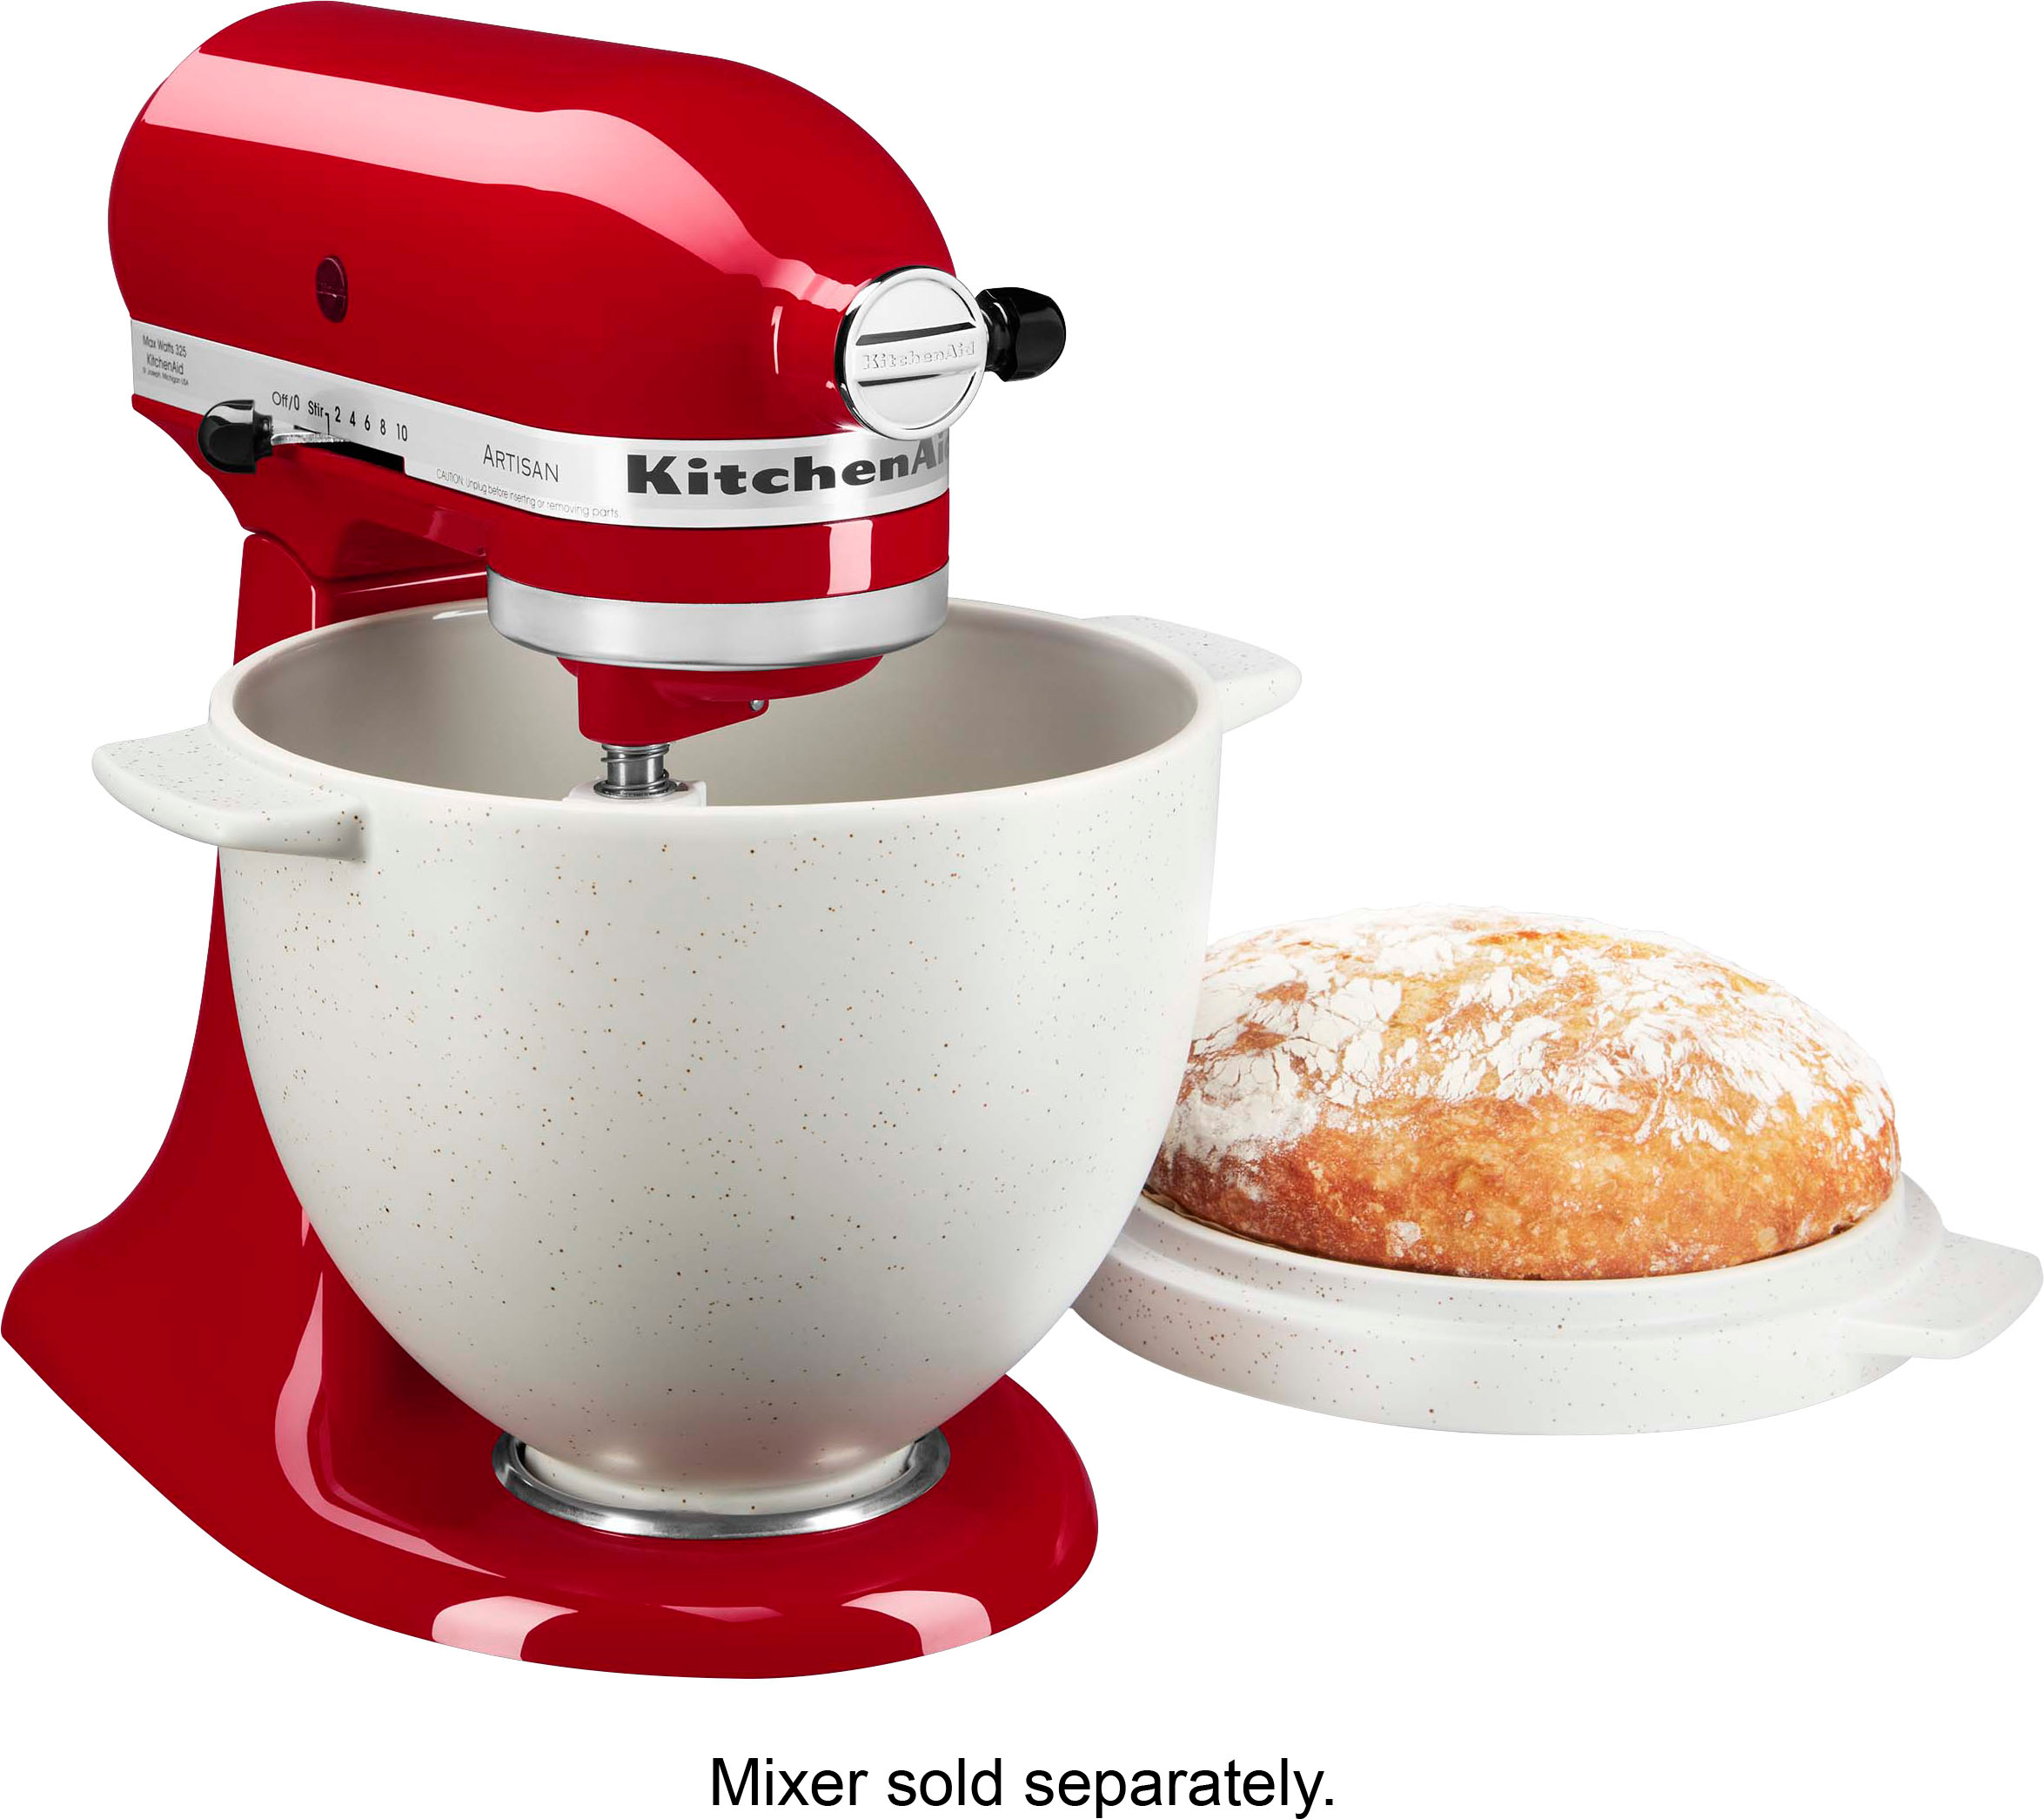 KitchenAid Bread Bowl with Baking Lid Grey Speckle KSM2CB5BGS - Best Buy